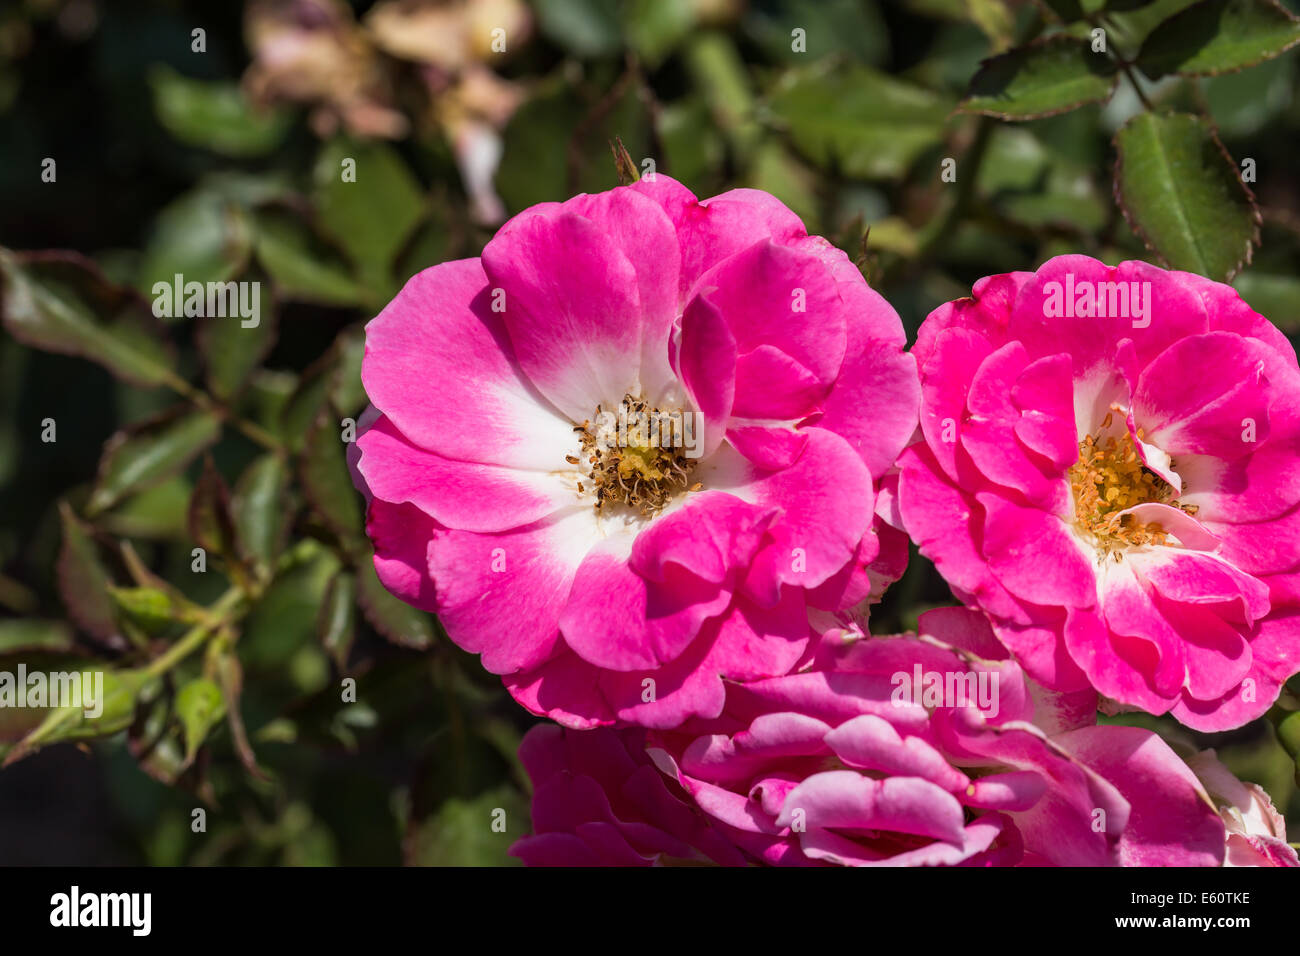 Pink rosa dumalis. This is a flower, wild rose Stock Photo